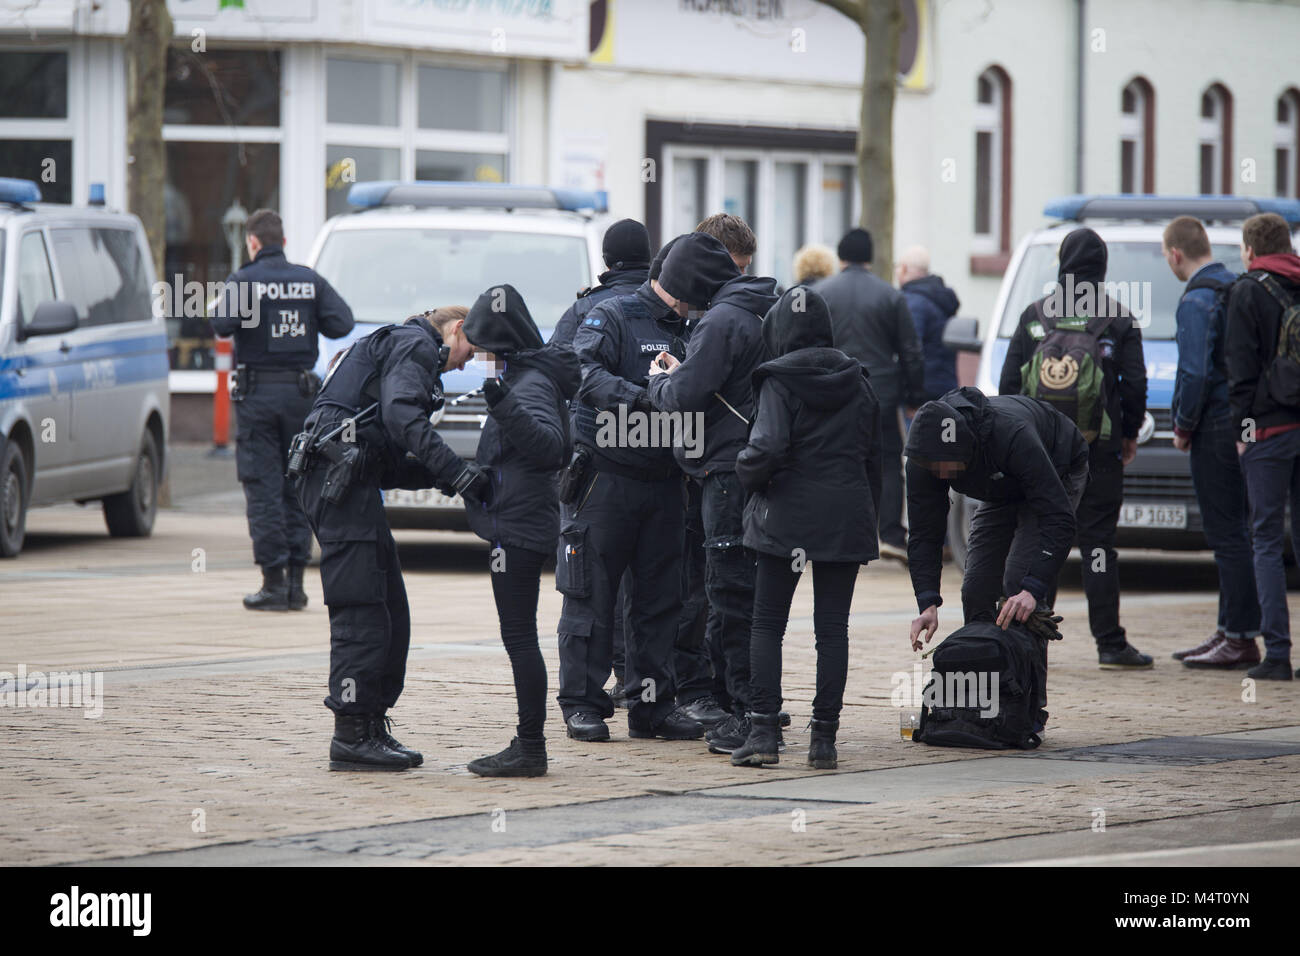 February 17, 2018 - Nordhausen, ThÃ¼ringen, Germany - Pocket control at the counter-protest of the ''Alliance against right-wing extremism Nordhausen' Credit: Jannis Grosse/ZUMA Wire/Alamy Live News Stock Photo